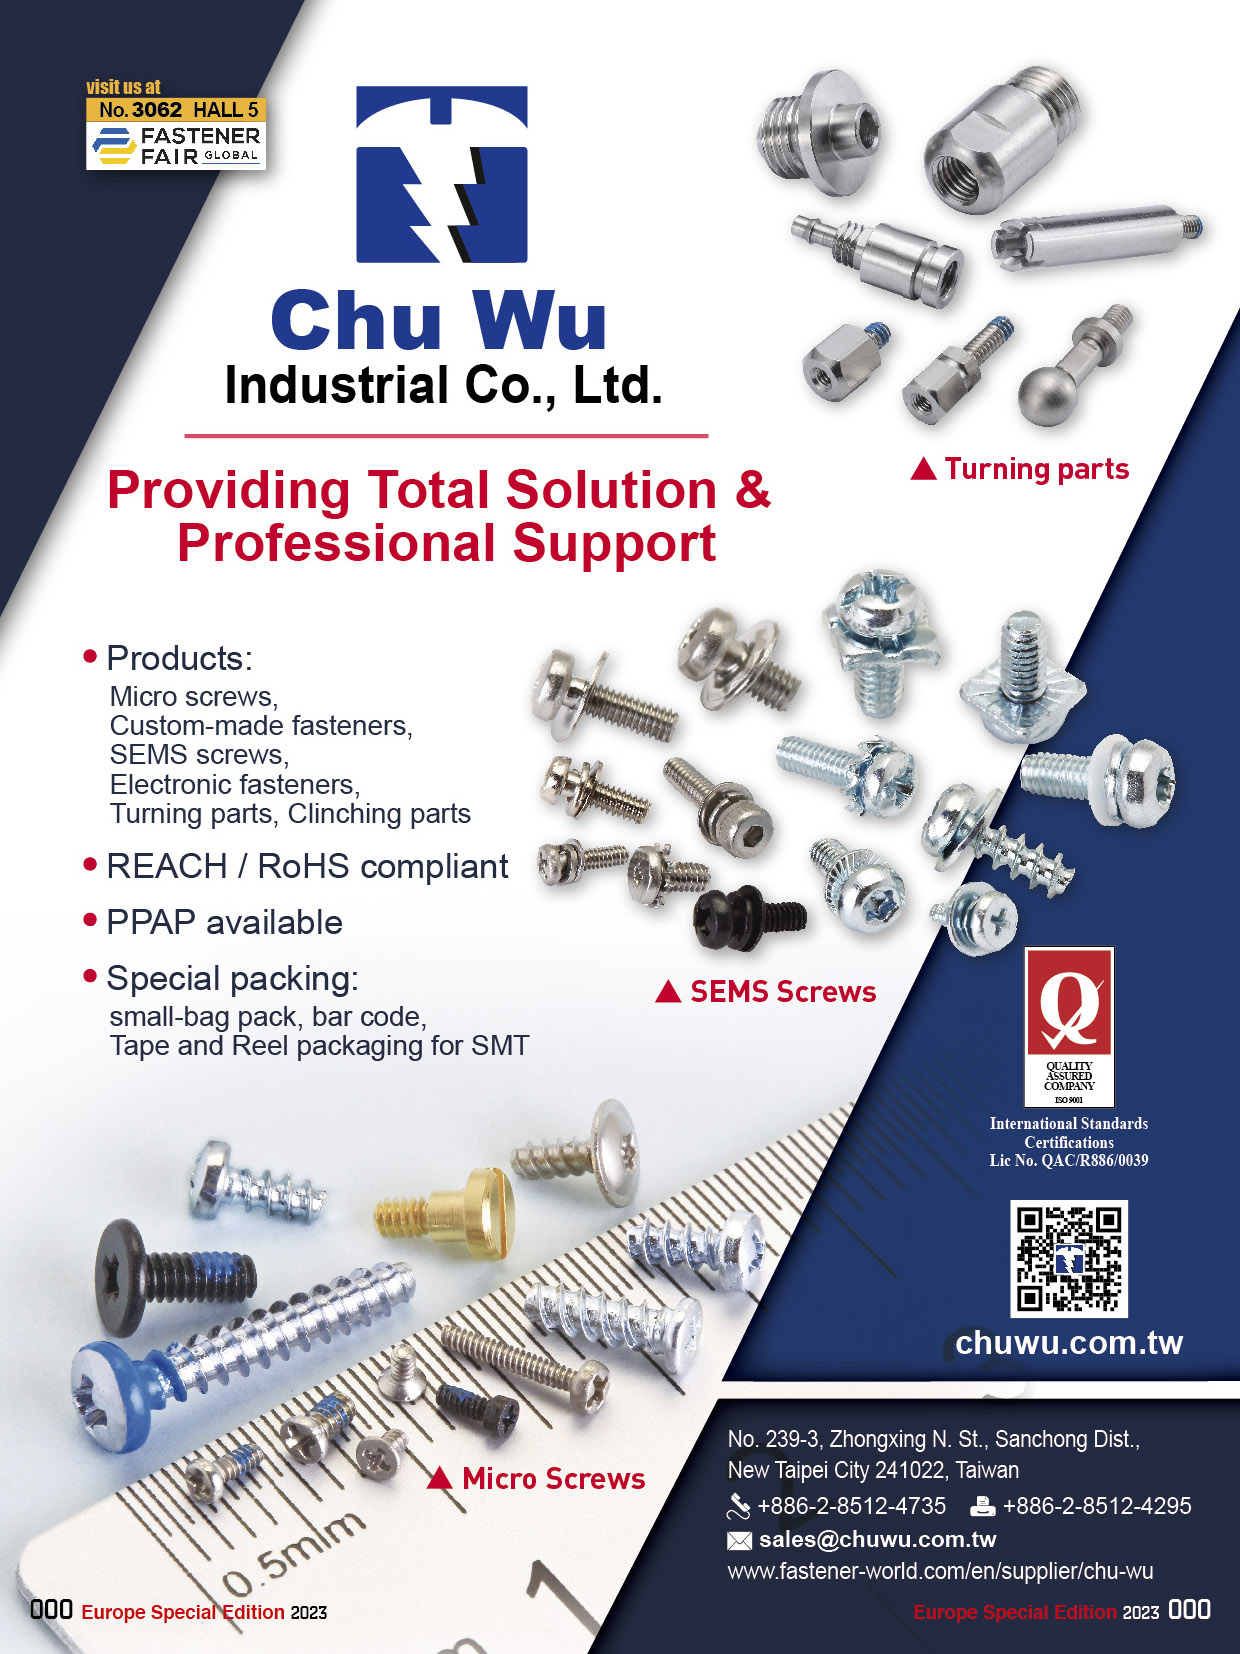 CHU WU INDUSTRIAL CO., LTD.  , Micro Screws, Custom-made Fasteners, Sems Screws, Electronic Fasteners, Turning Parts, Clinching Parts , Micro Forming Parts